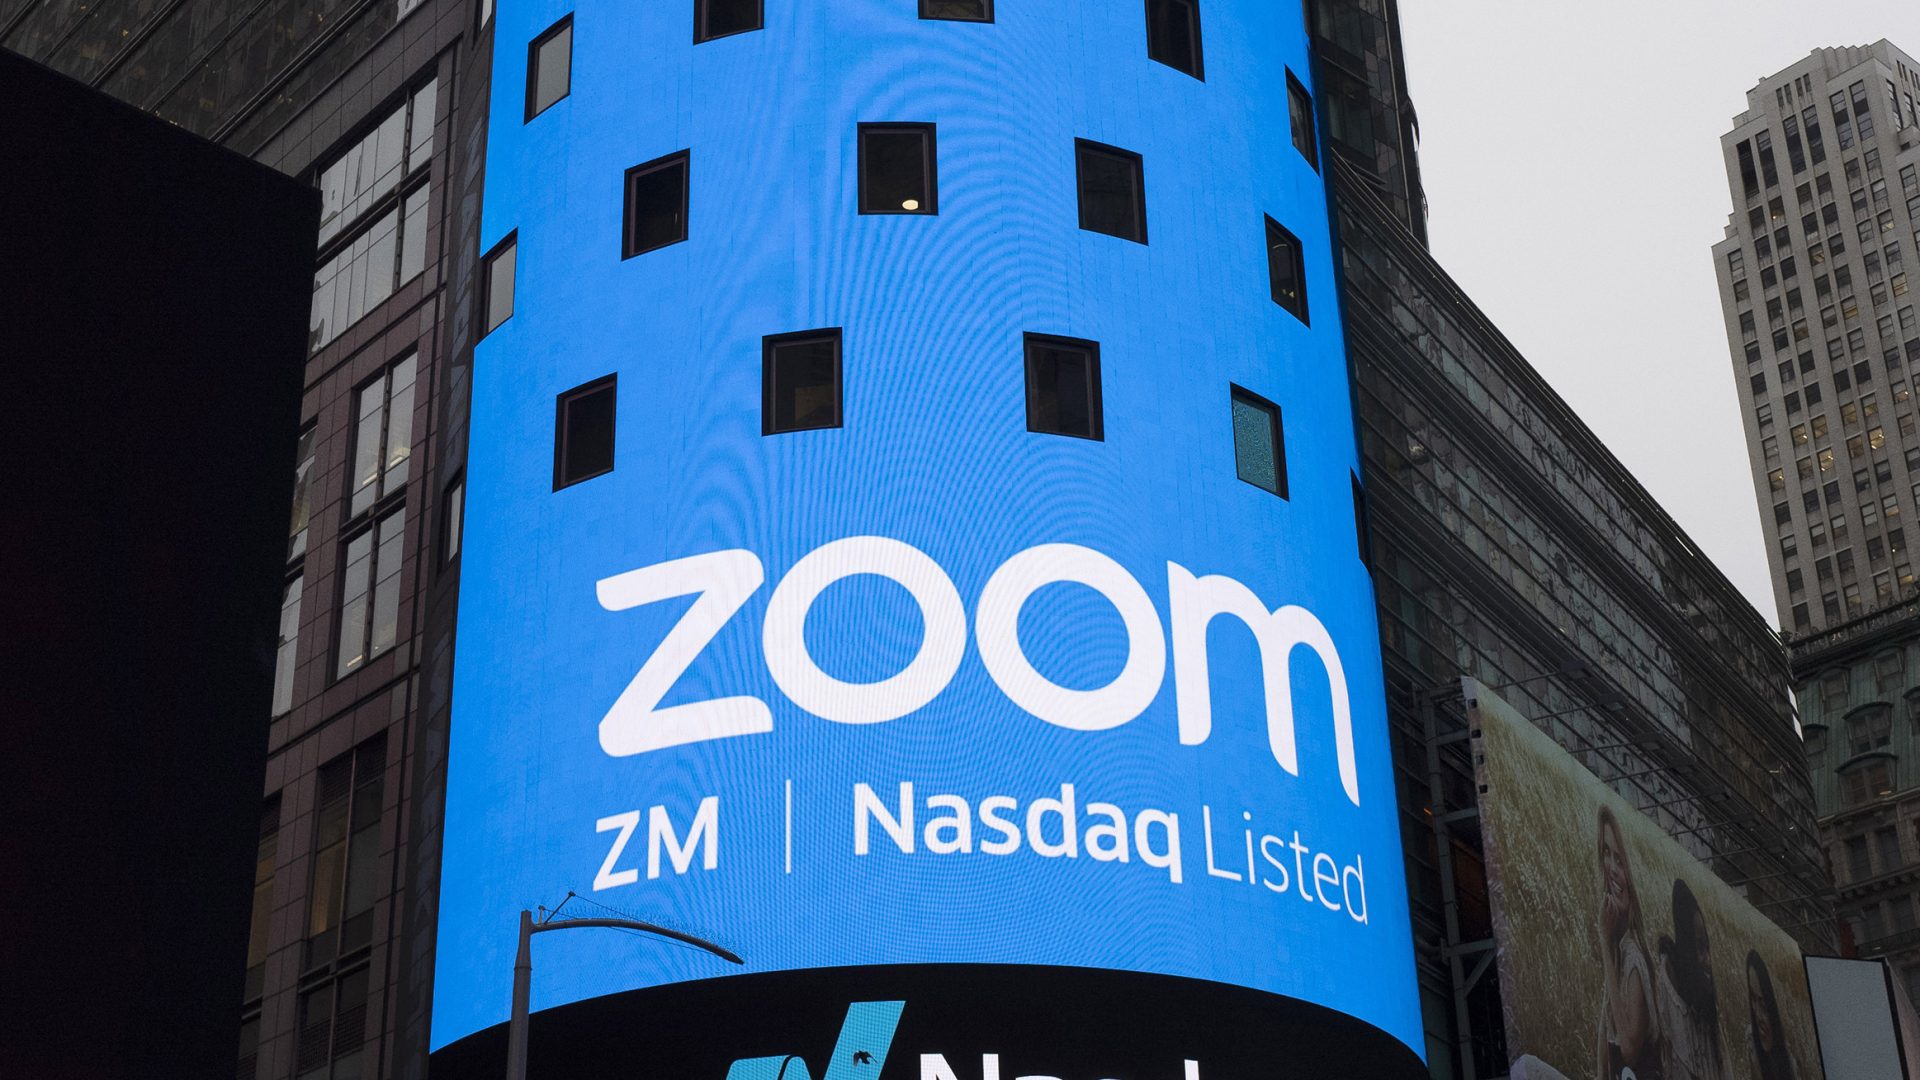 FILE PHOTO: This April 18, 2019, file photo shows a sign for Zoom Video Communications ahead of the company's Nasdaq IPO in New York.